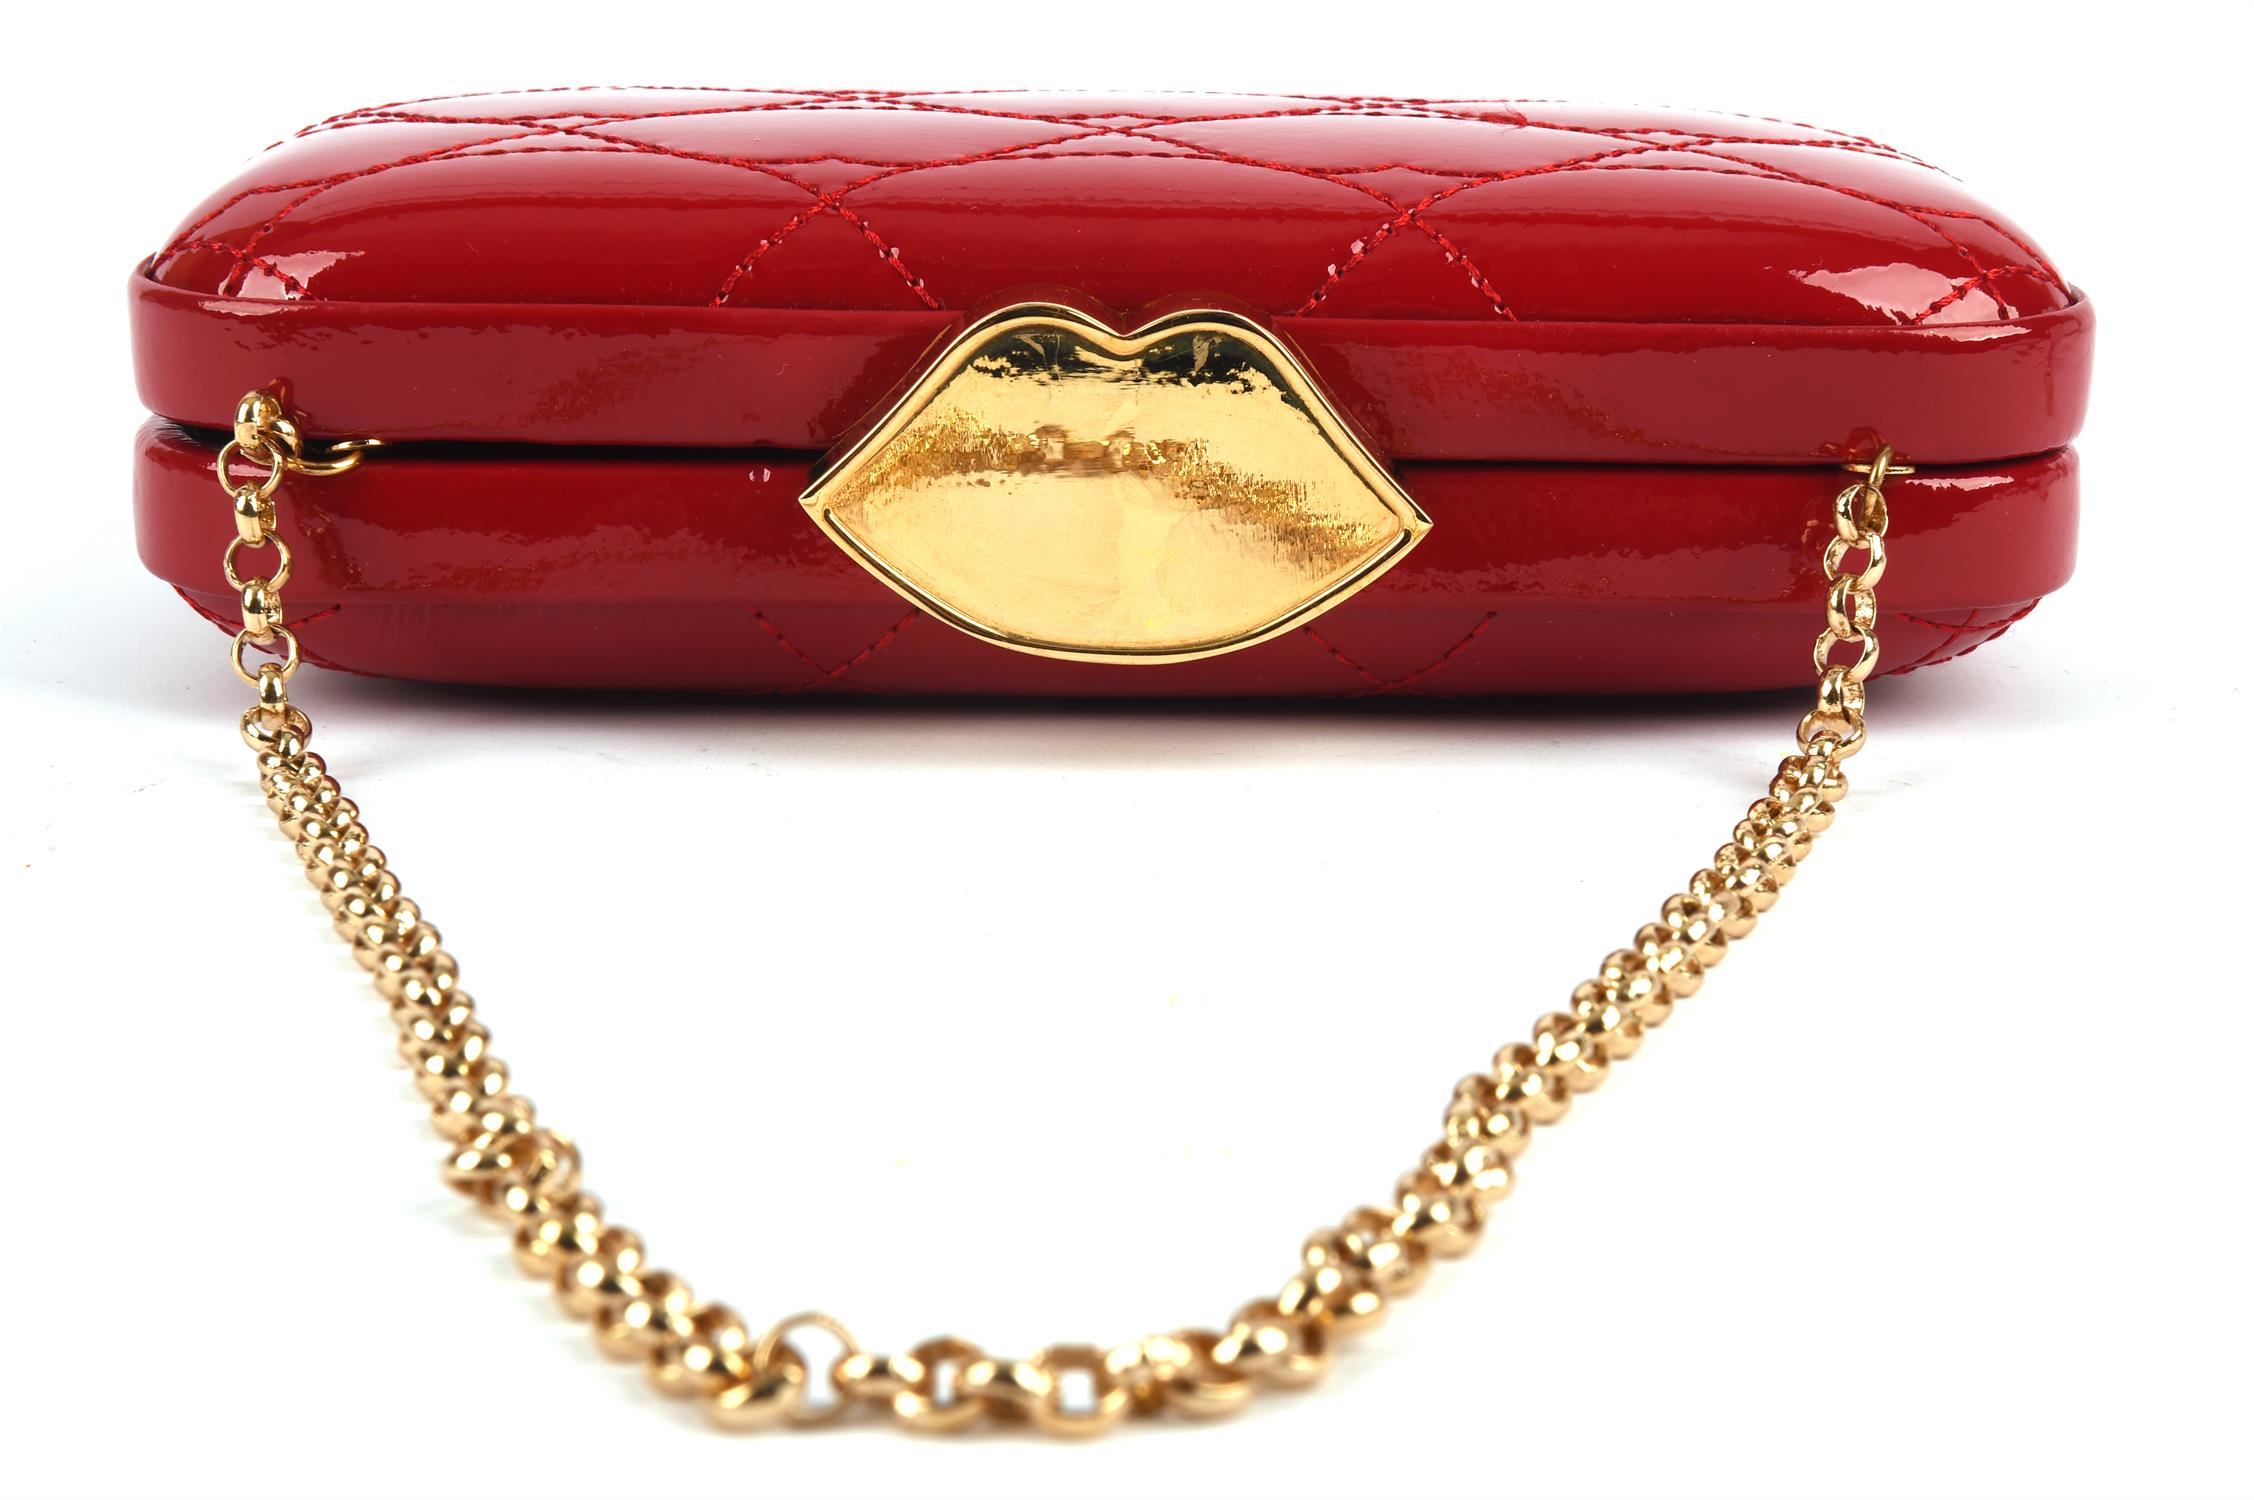 LULU GUINNESS boxed lipstick red leather lips handbag with gold chain and hardware with dust bag - Image 5 of 7